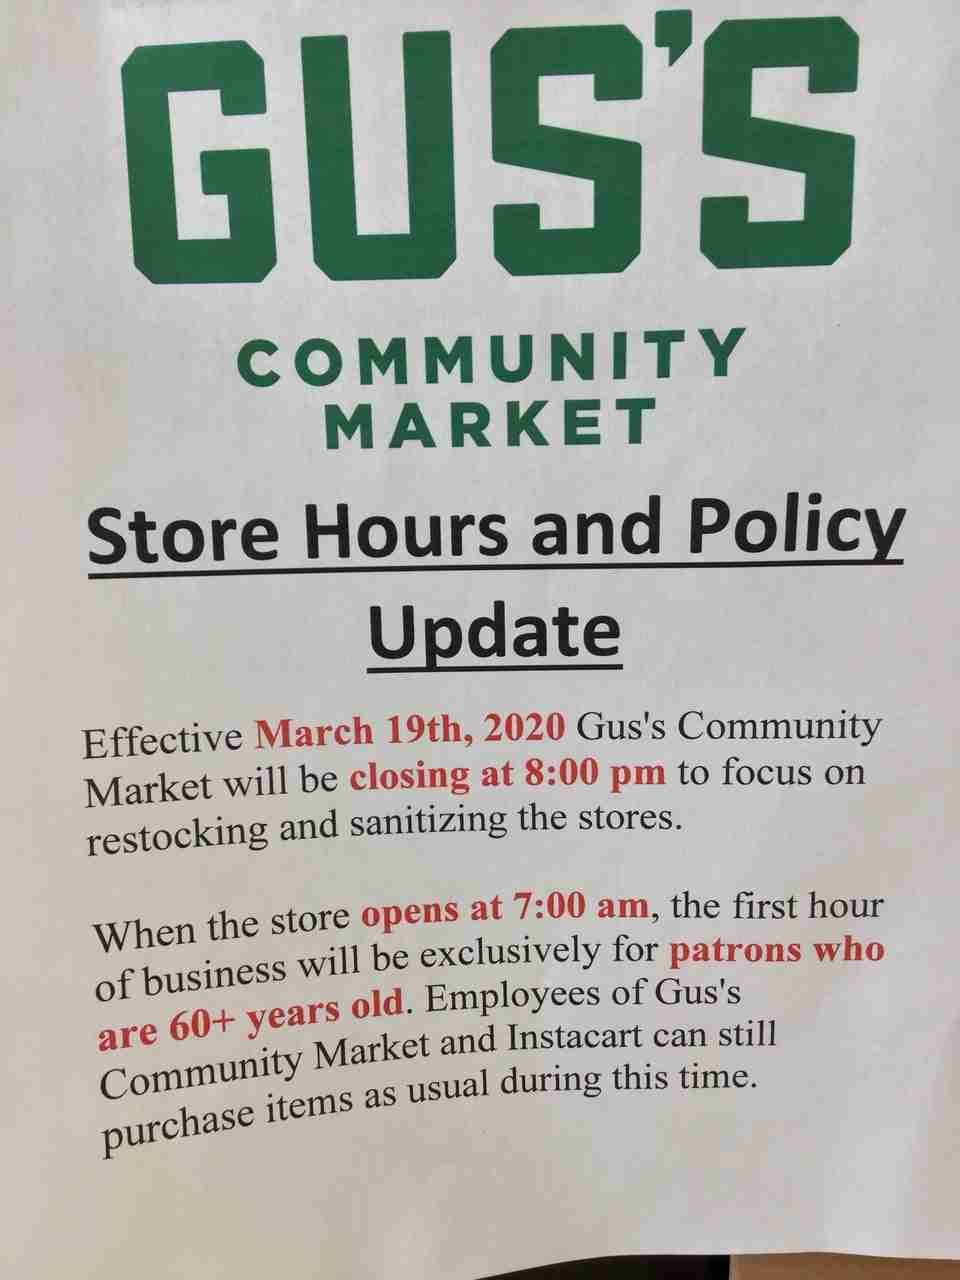 Sign at Gus’s Community Market noting Store Hours and Policy Update effective March 19th, 2020, closing earlier at 8pm for sanitizing, and first hour at 7am exclusively for 60+ years old patrons, and Instacart.